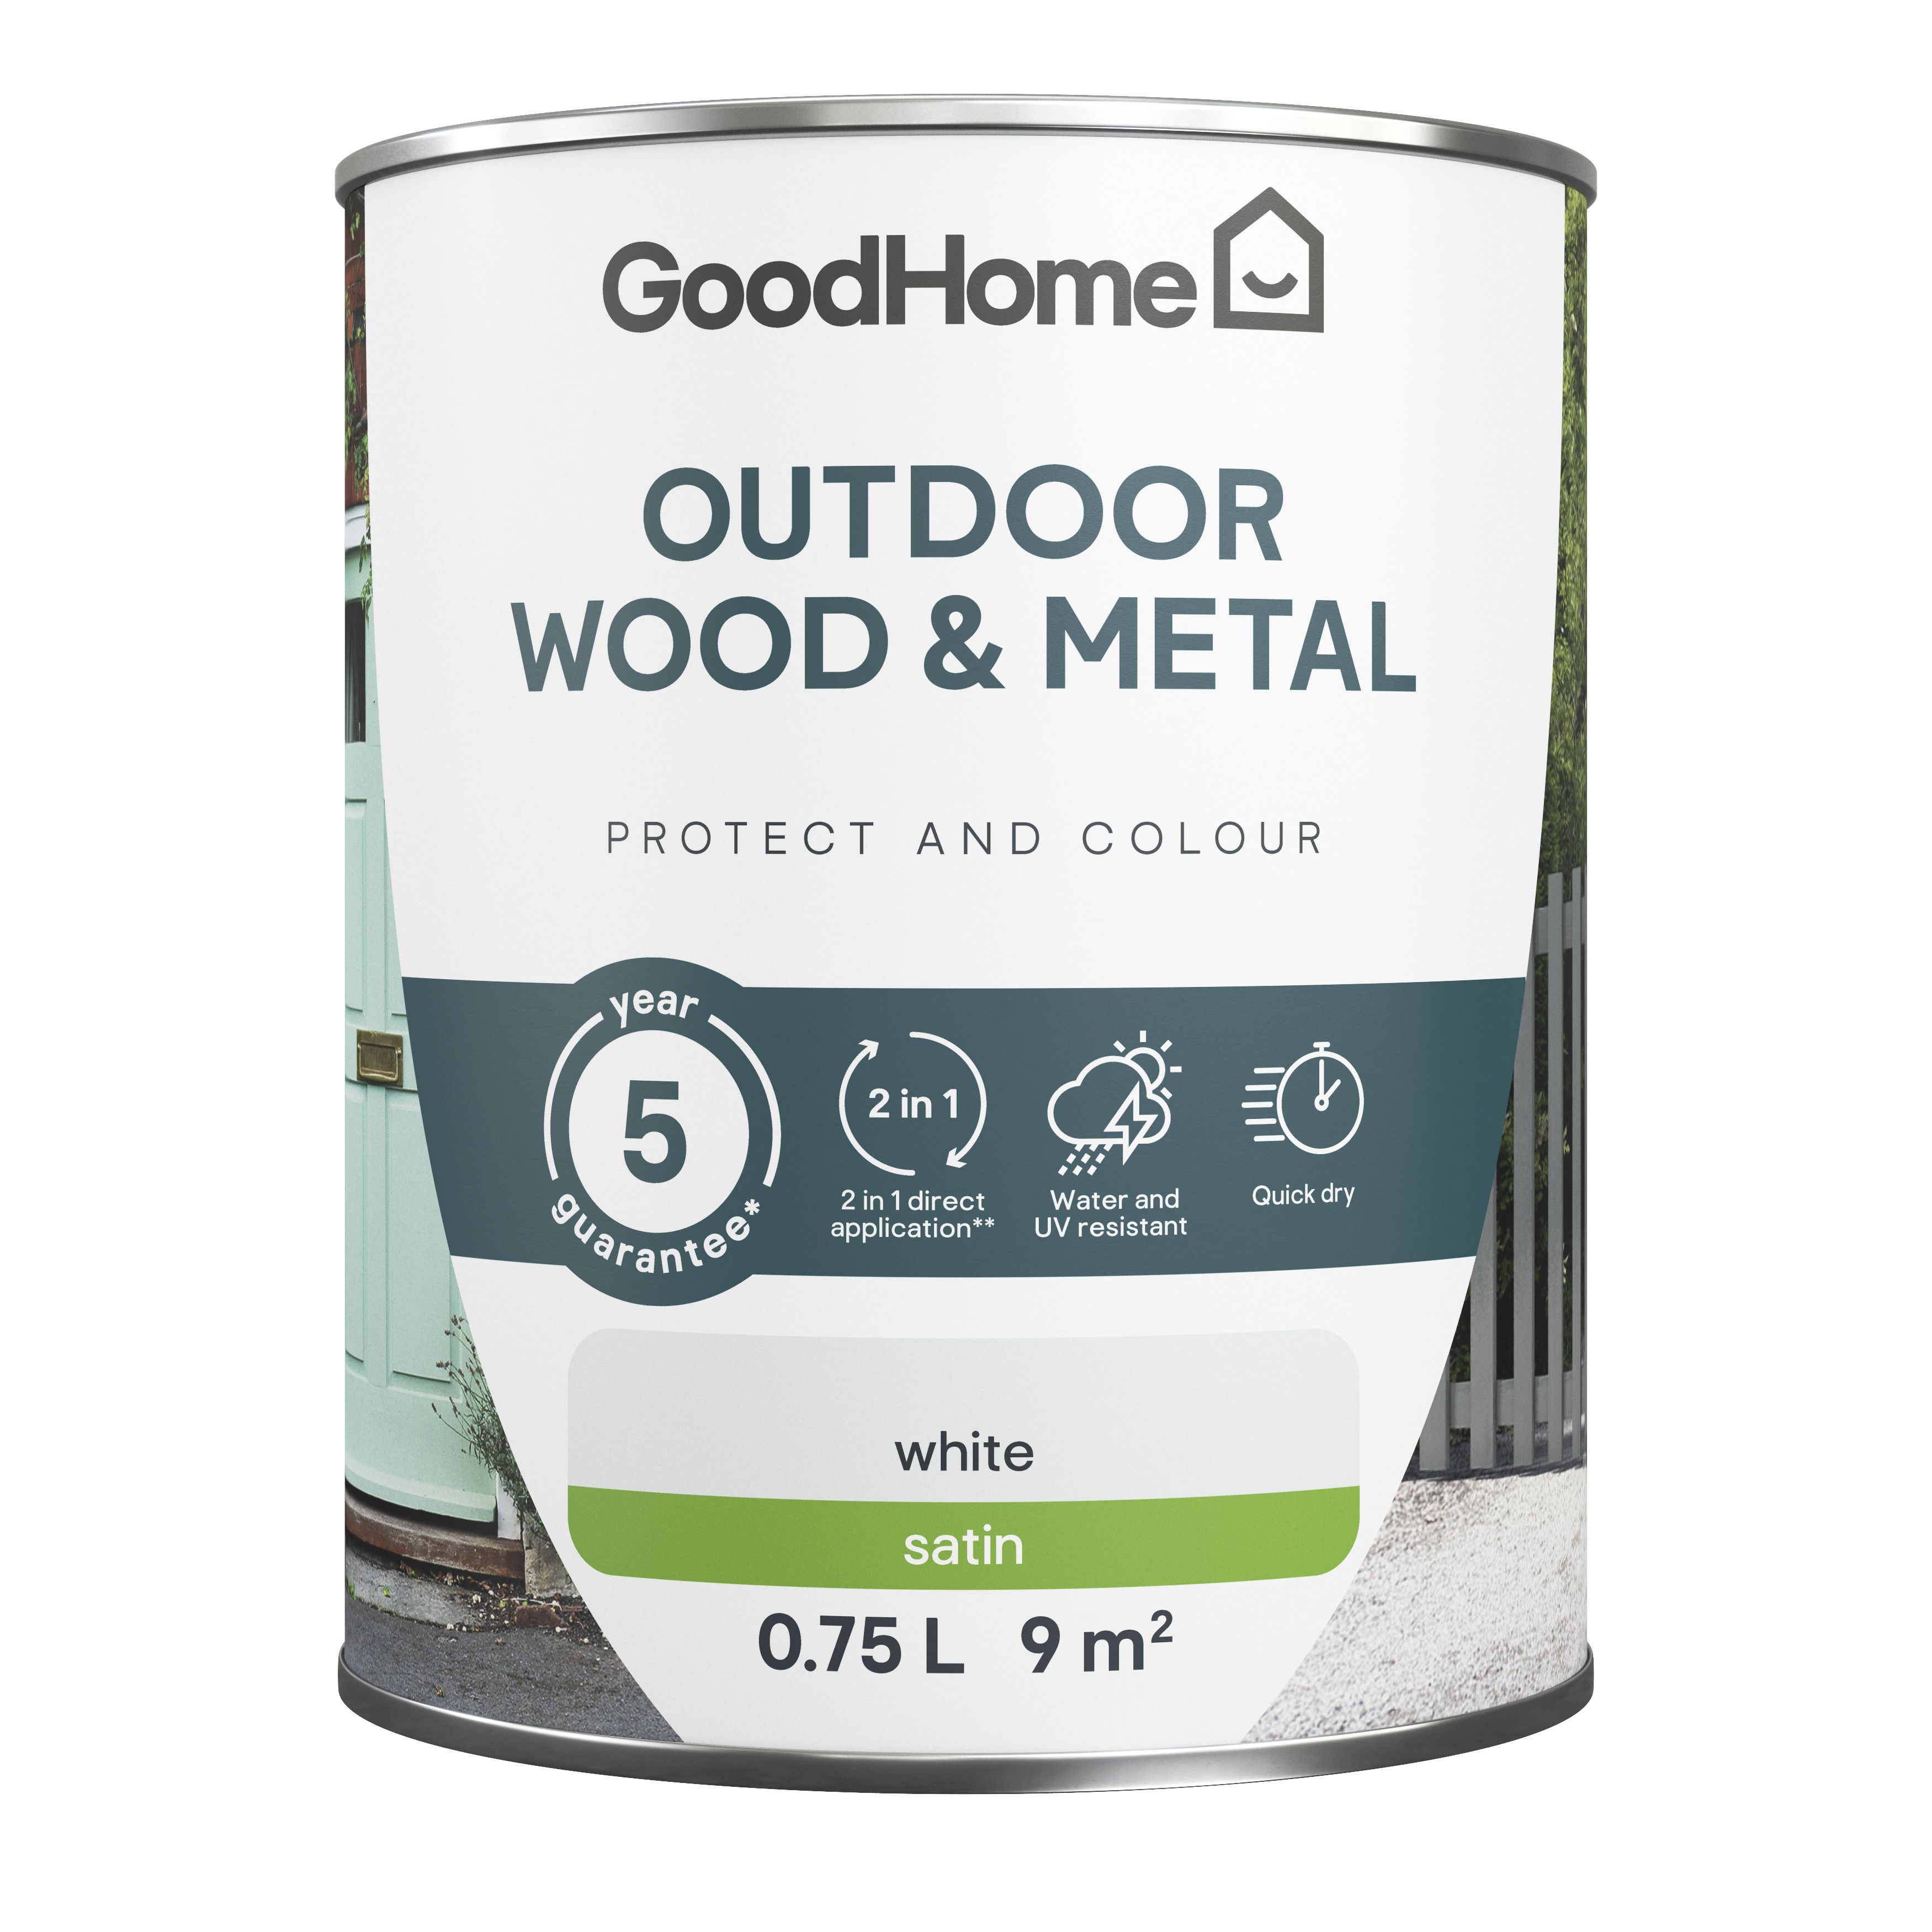 GoodHome Outdoor White Satinwood Multi-surface paint, 750ml